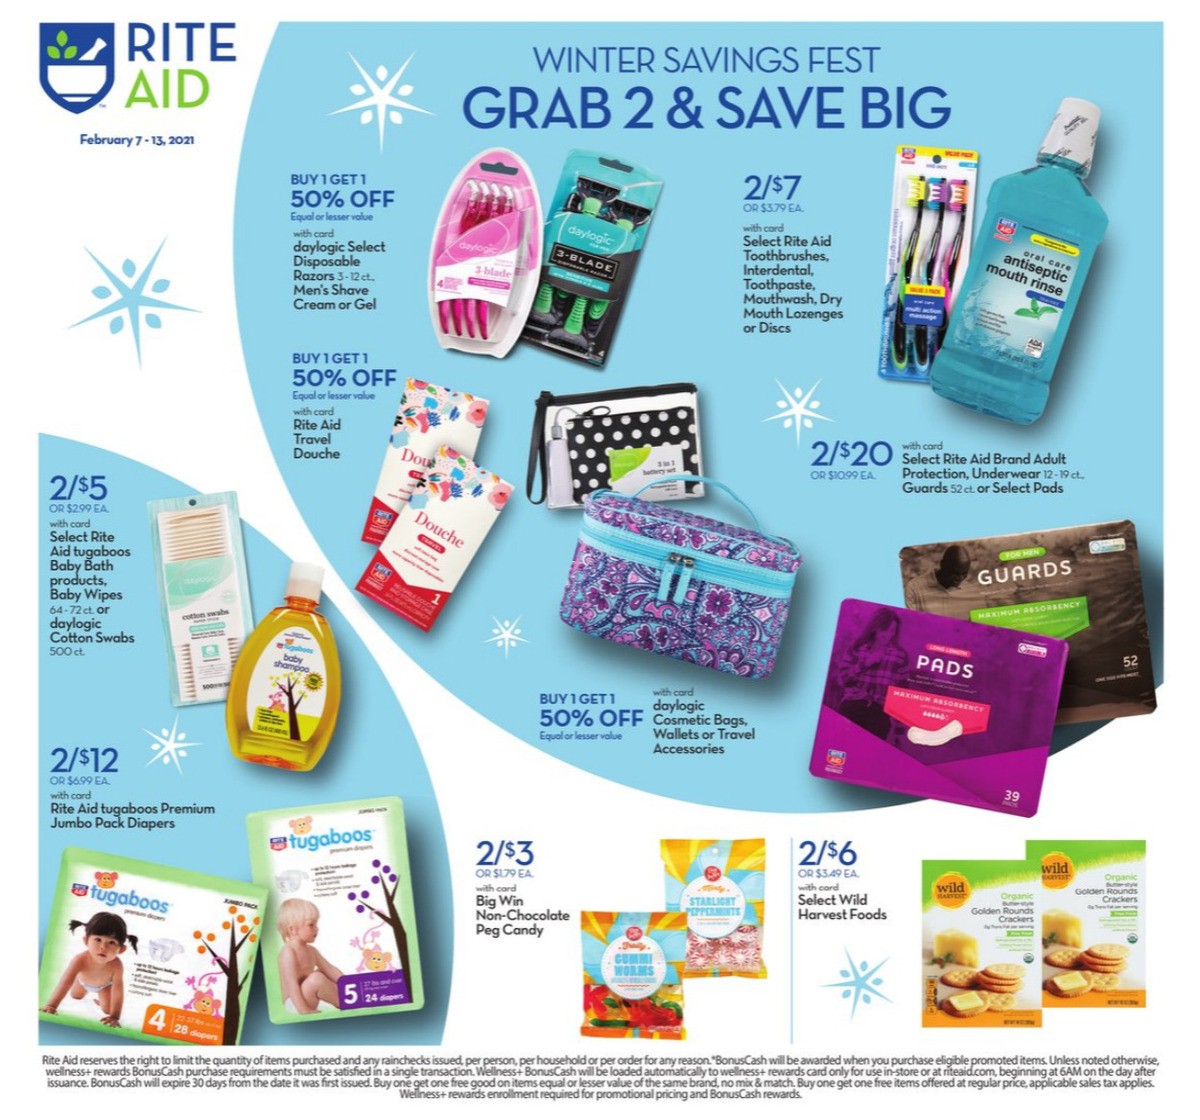 Rite Aid Save on Rite Aid Brand Weekly Ad from February 7